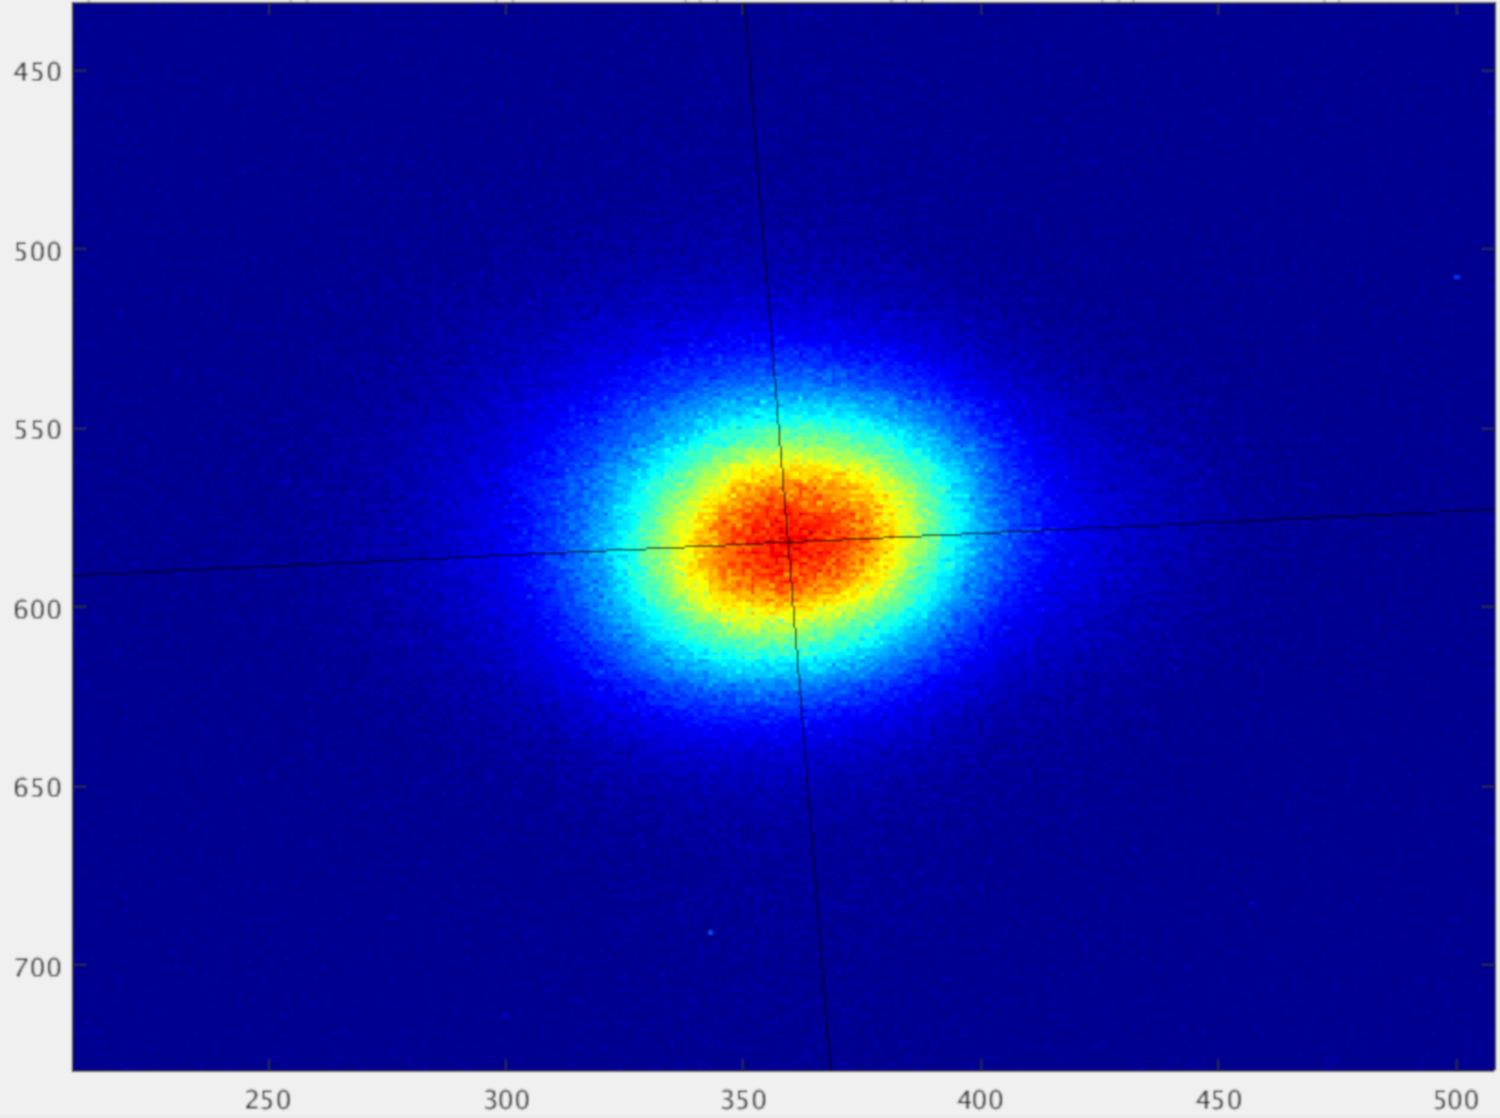 Image - This image shows the profile of an electron beam at Berkeley Lab’s Advanced Light Source synchrotron, represented as pixels measured by a charged coupled device (CCD) sensor. When stabilized by a machine-learning algorithm, the beam has a horizontal size dimension of 49 microns root mean squared and vertical size dimension of 48 microns root mean squared. Some types of experiments require that the corresponding light beam be stable on time scales ranging from seconds to hours to ensure reliable data. (Credit: Lawrence Berkeley National Laboratory)